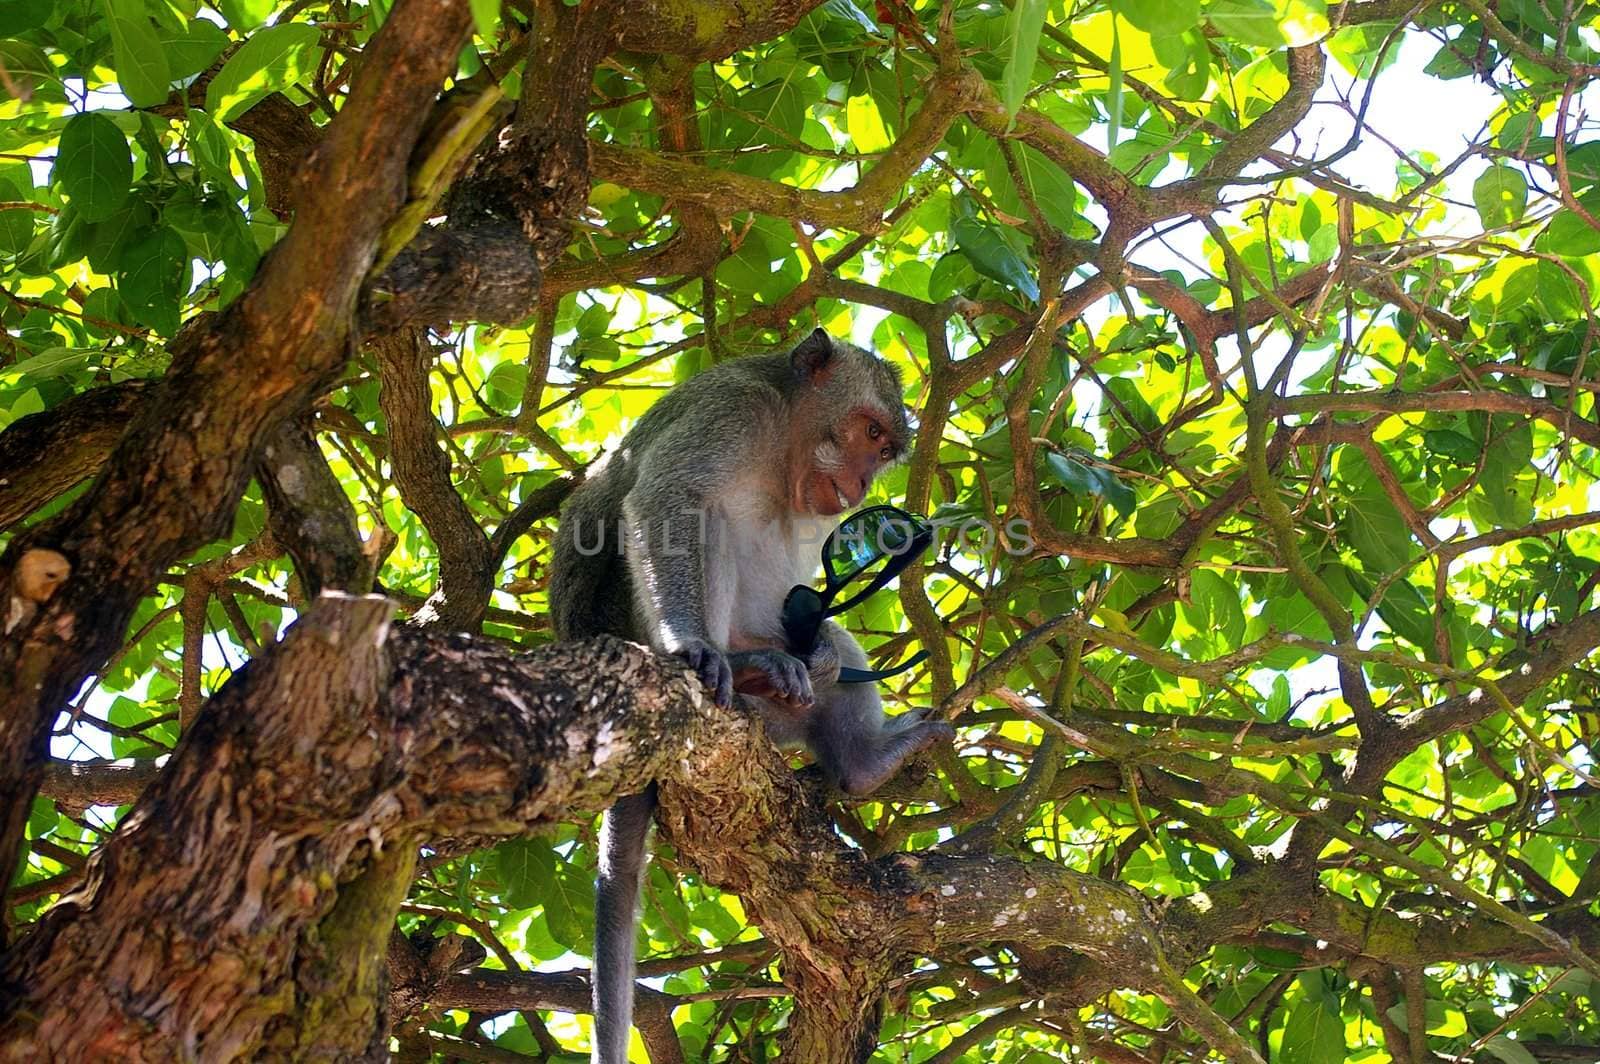 A monkey in a tree with sunglasses, which was snatched from a tourist. On the grounds of Pura Luhur, Uluwatu temple, Bali, Indonesia.